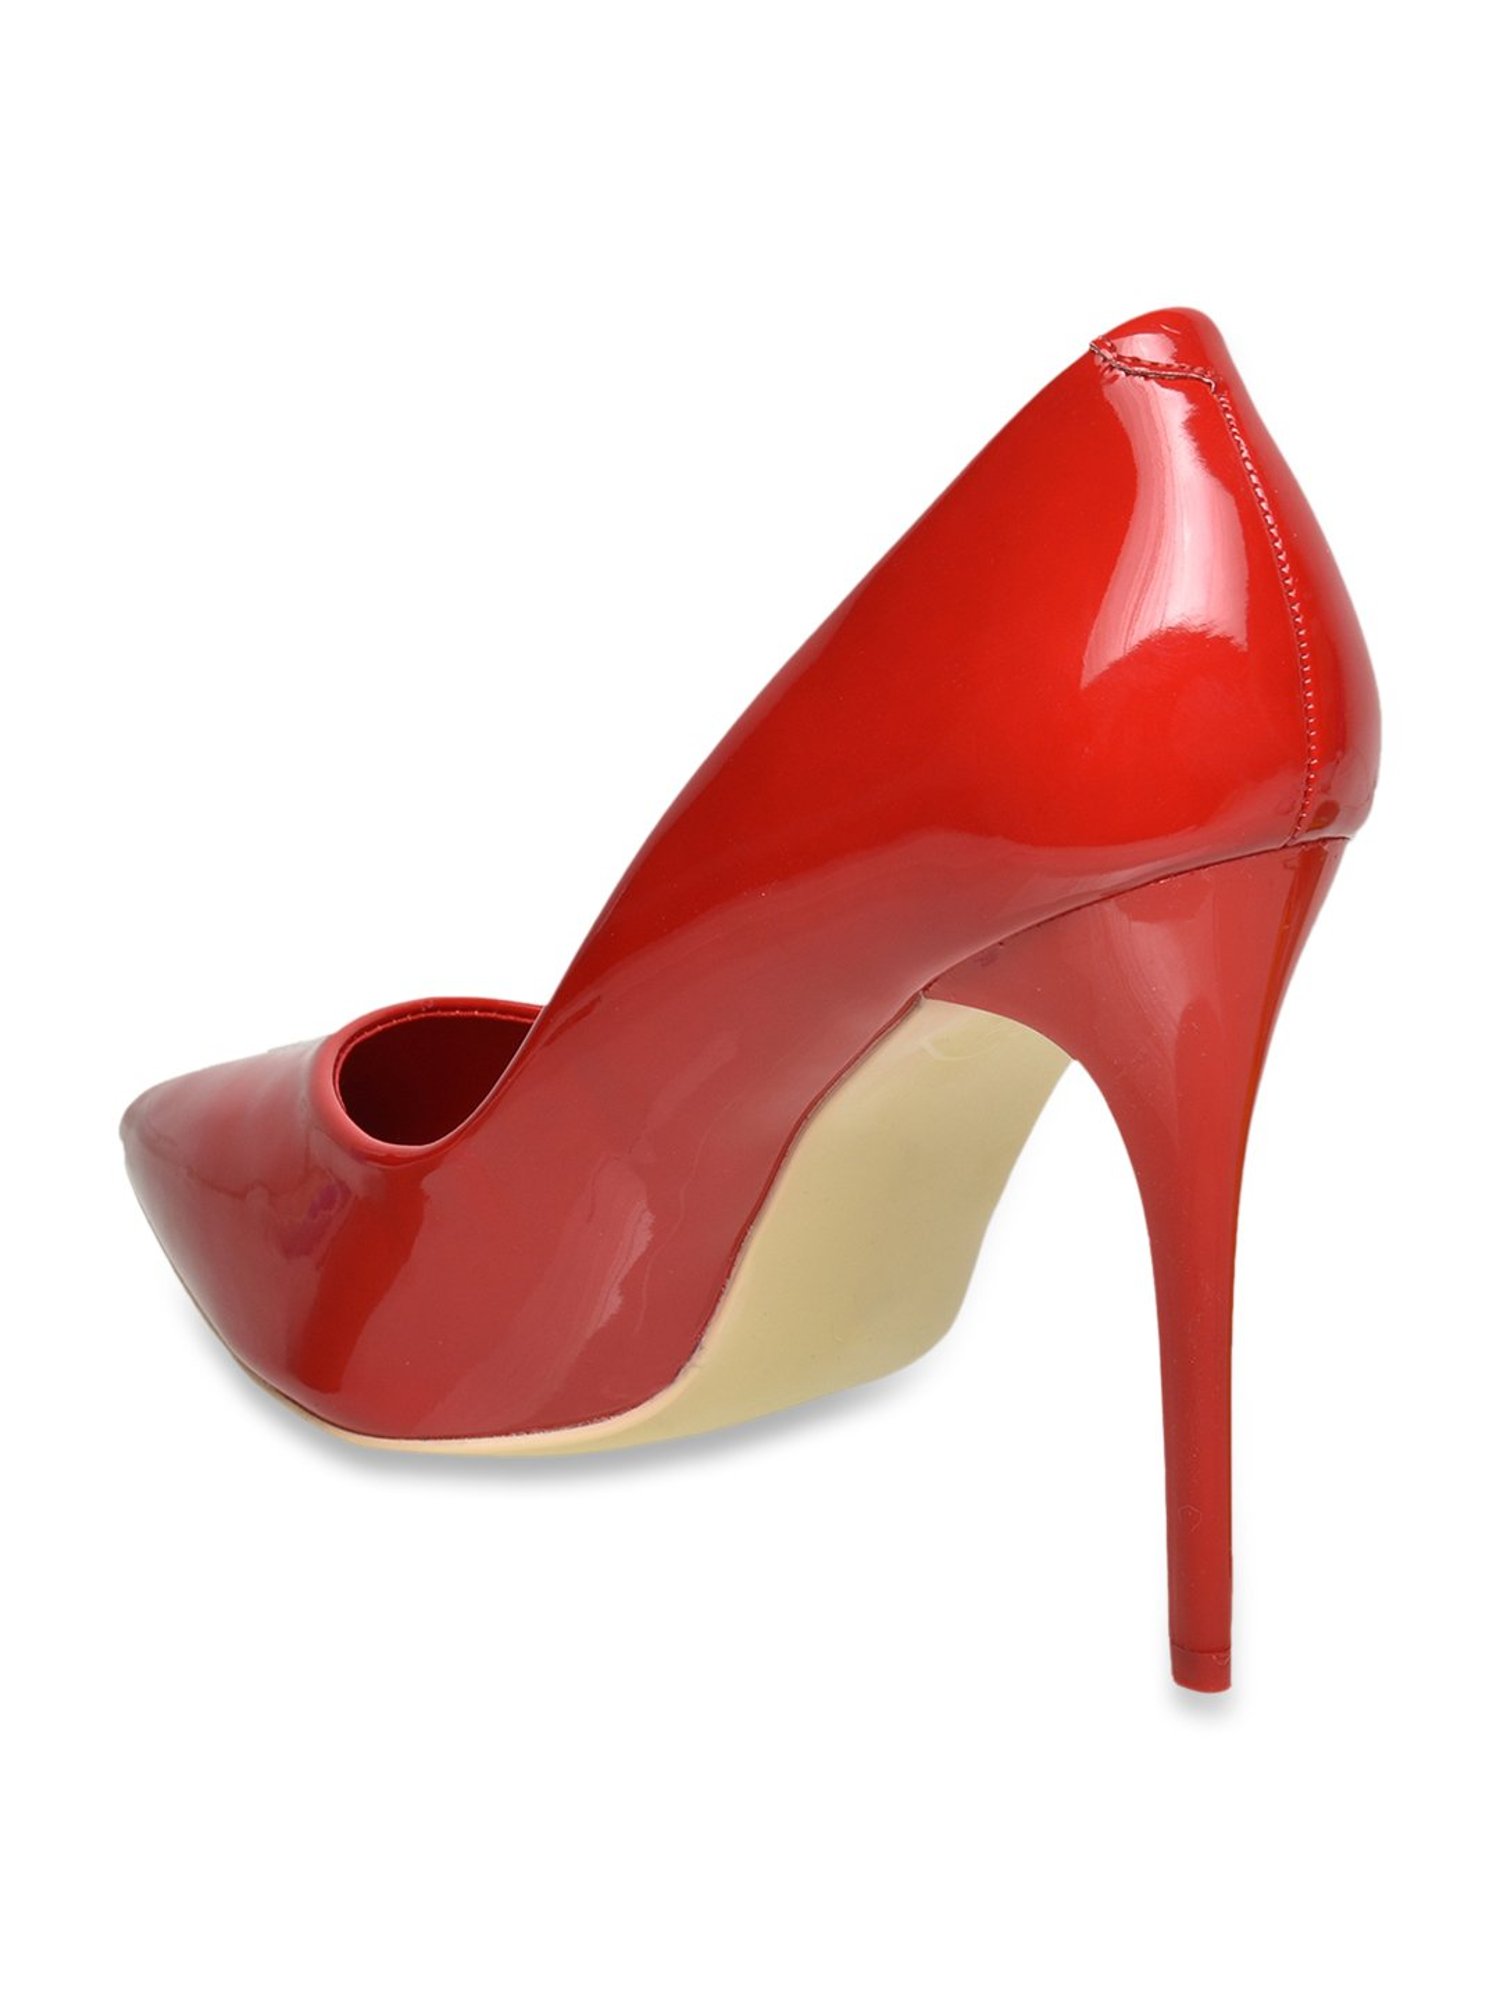 17,532 Red High Heels Illustration Images, Stock Photos, 3D objects, &  Vectors | Shutterstock